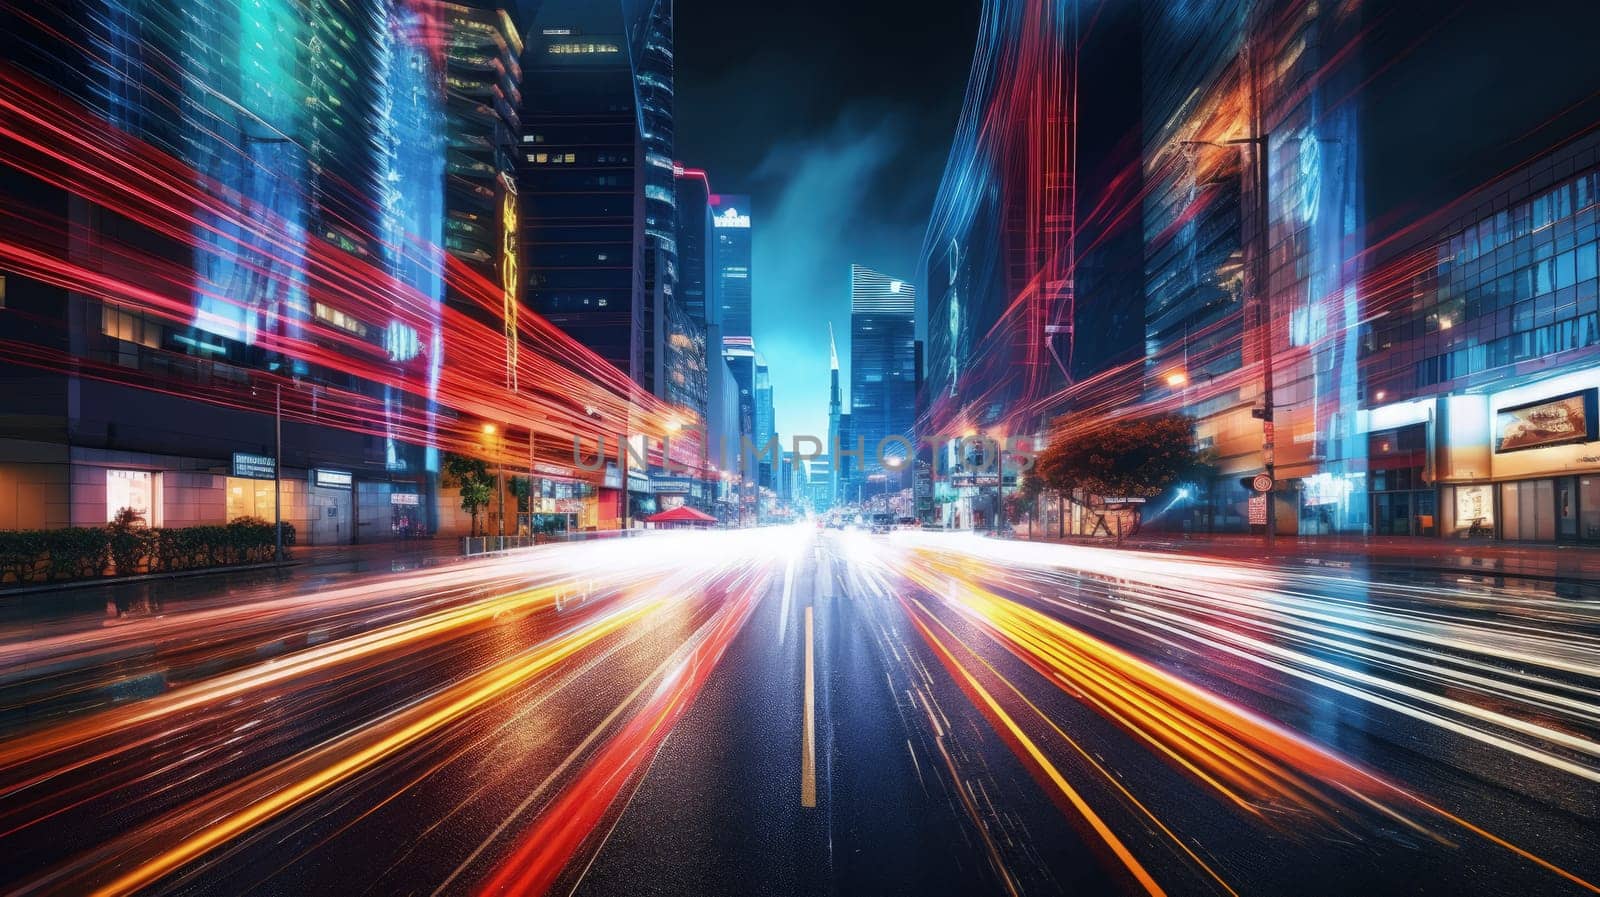 A dynamic night scene capturing city traffic with streaks of light-painting, the bustling streets aglow with vibrant hues of car lights